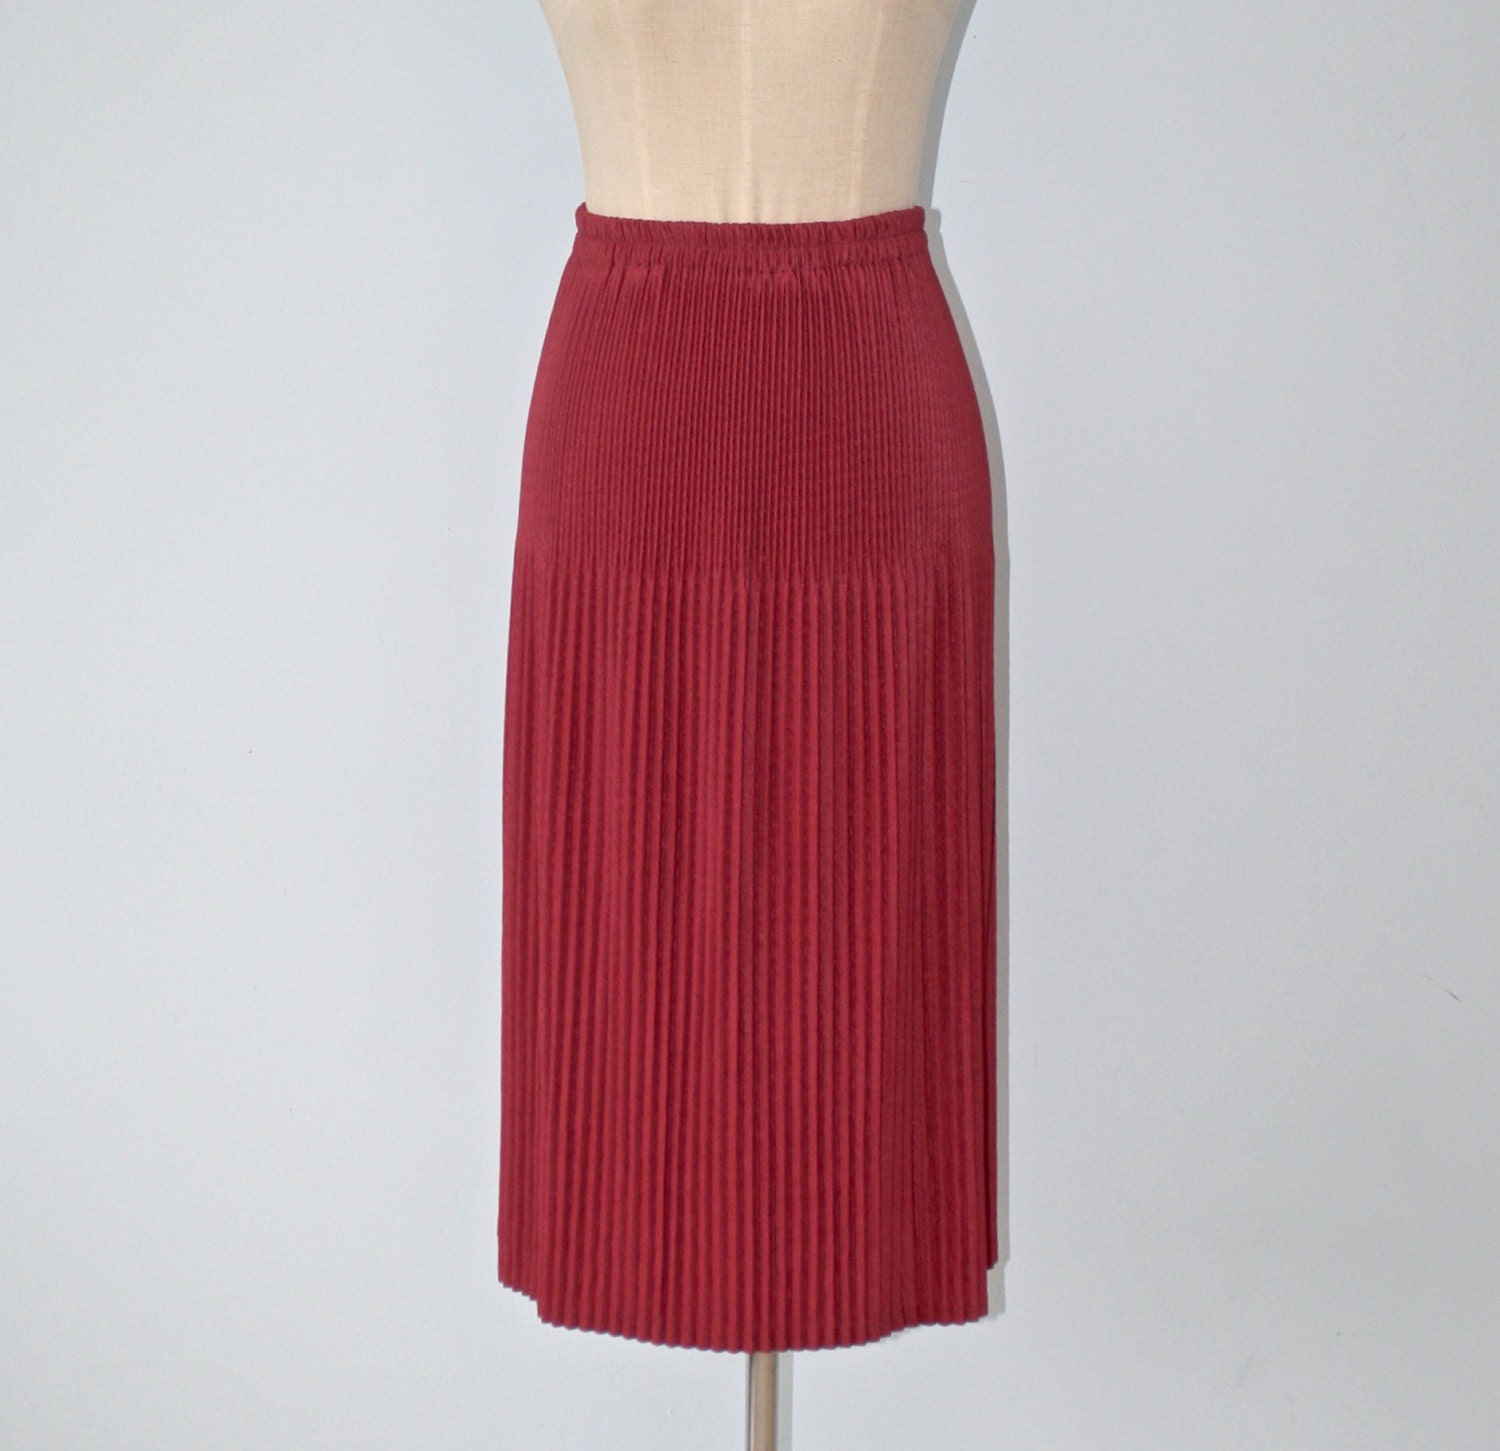 Vintage 1920s Flapper Style Skirt / 1960s by FoxyBritVintage